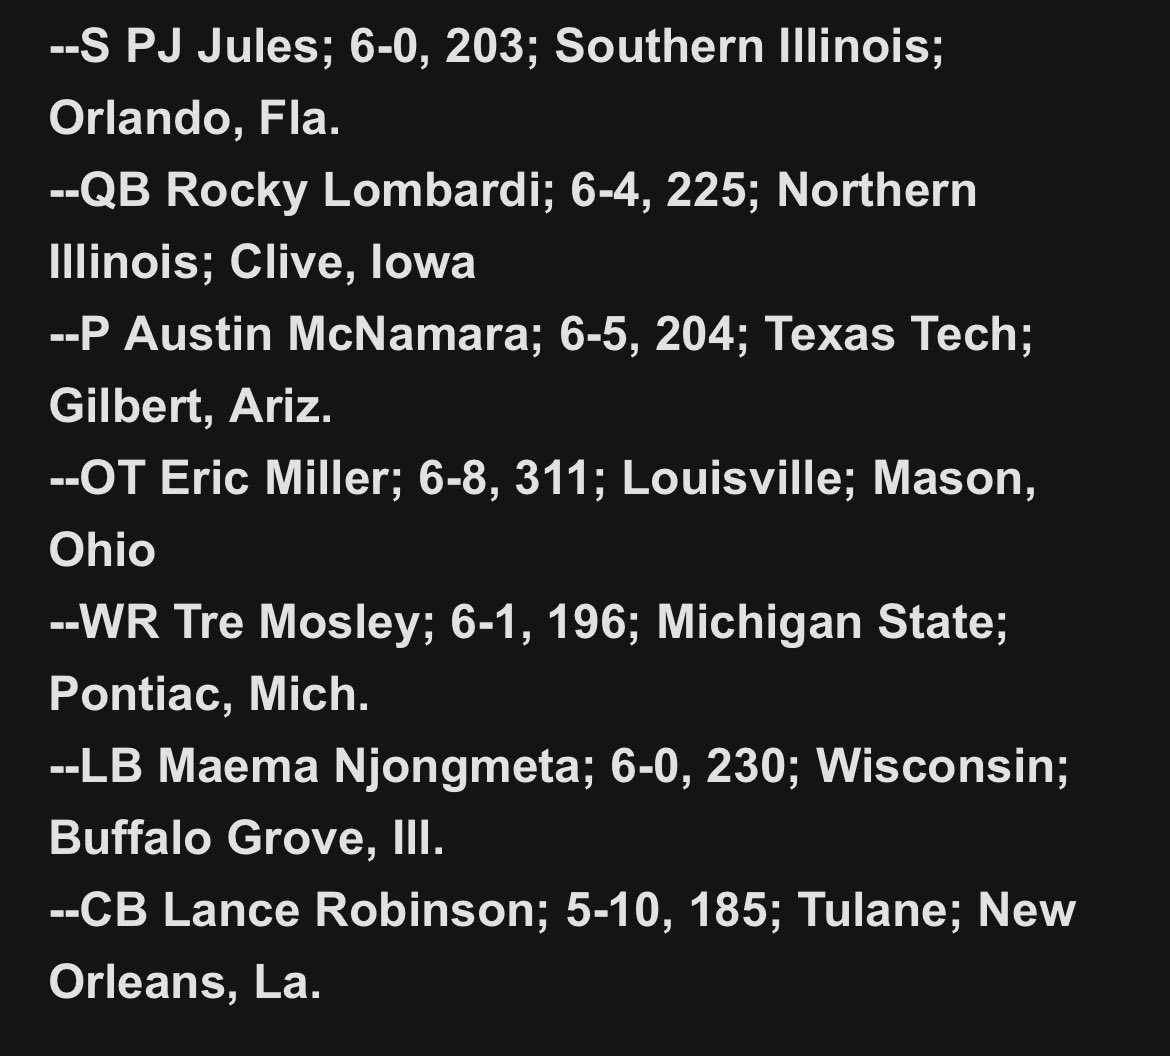 Bengals announce their undrafted free agent class: